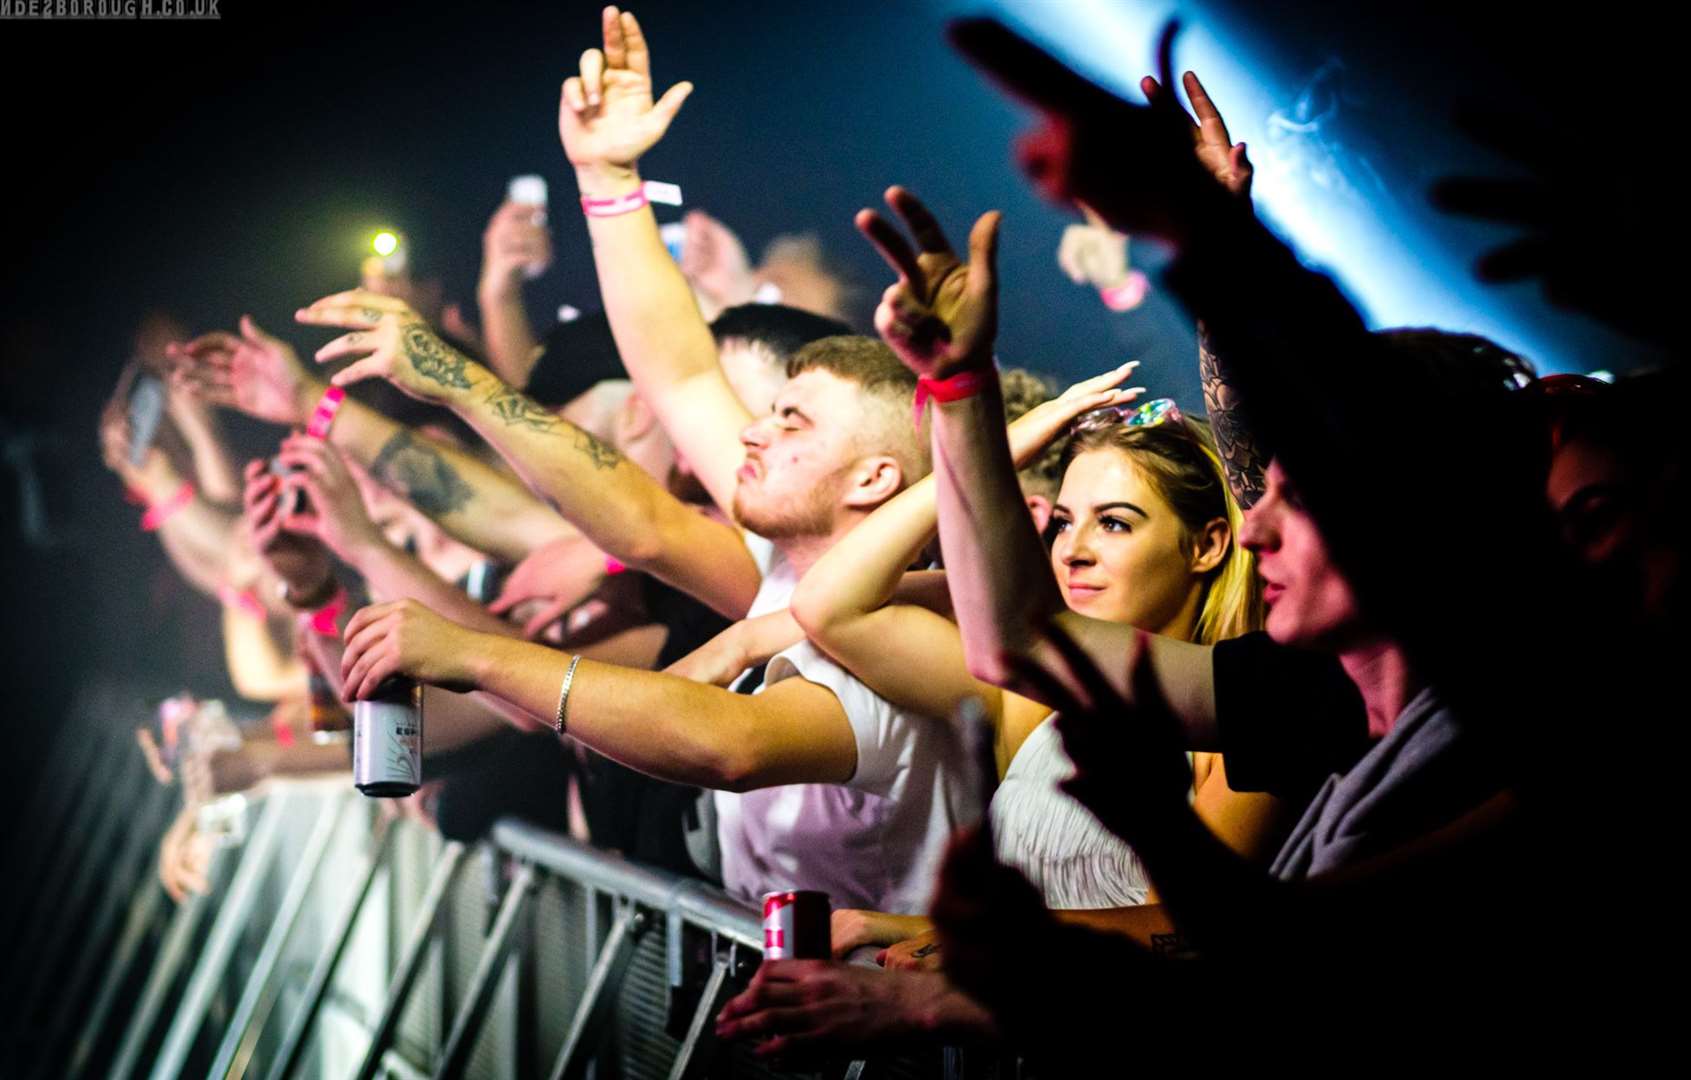 6,000 people attended last year's rave. Picture: Dan Desborough